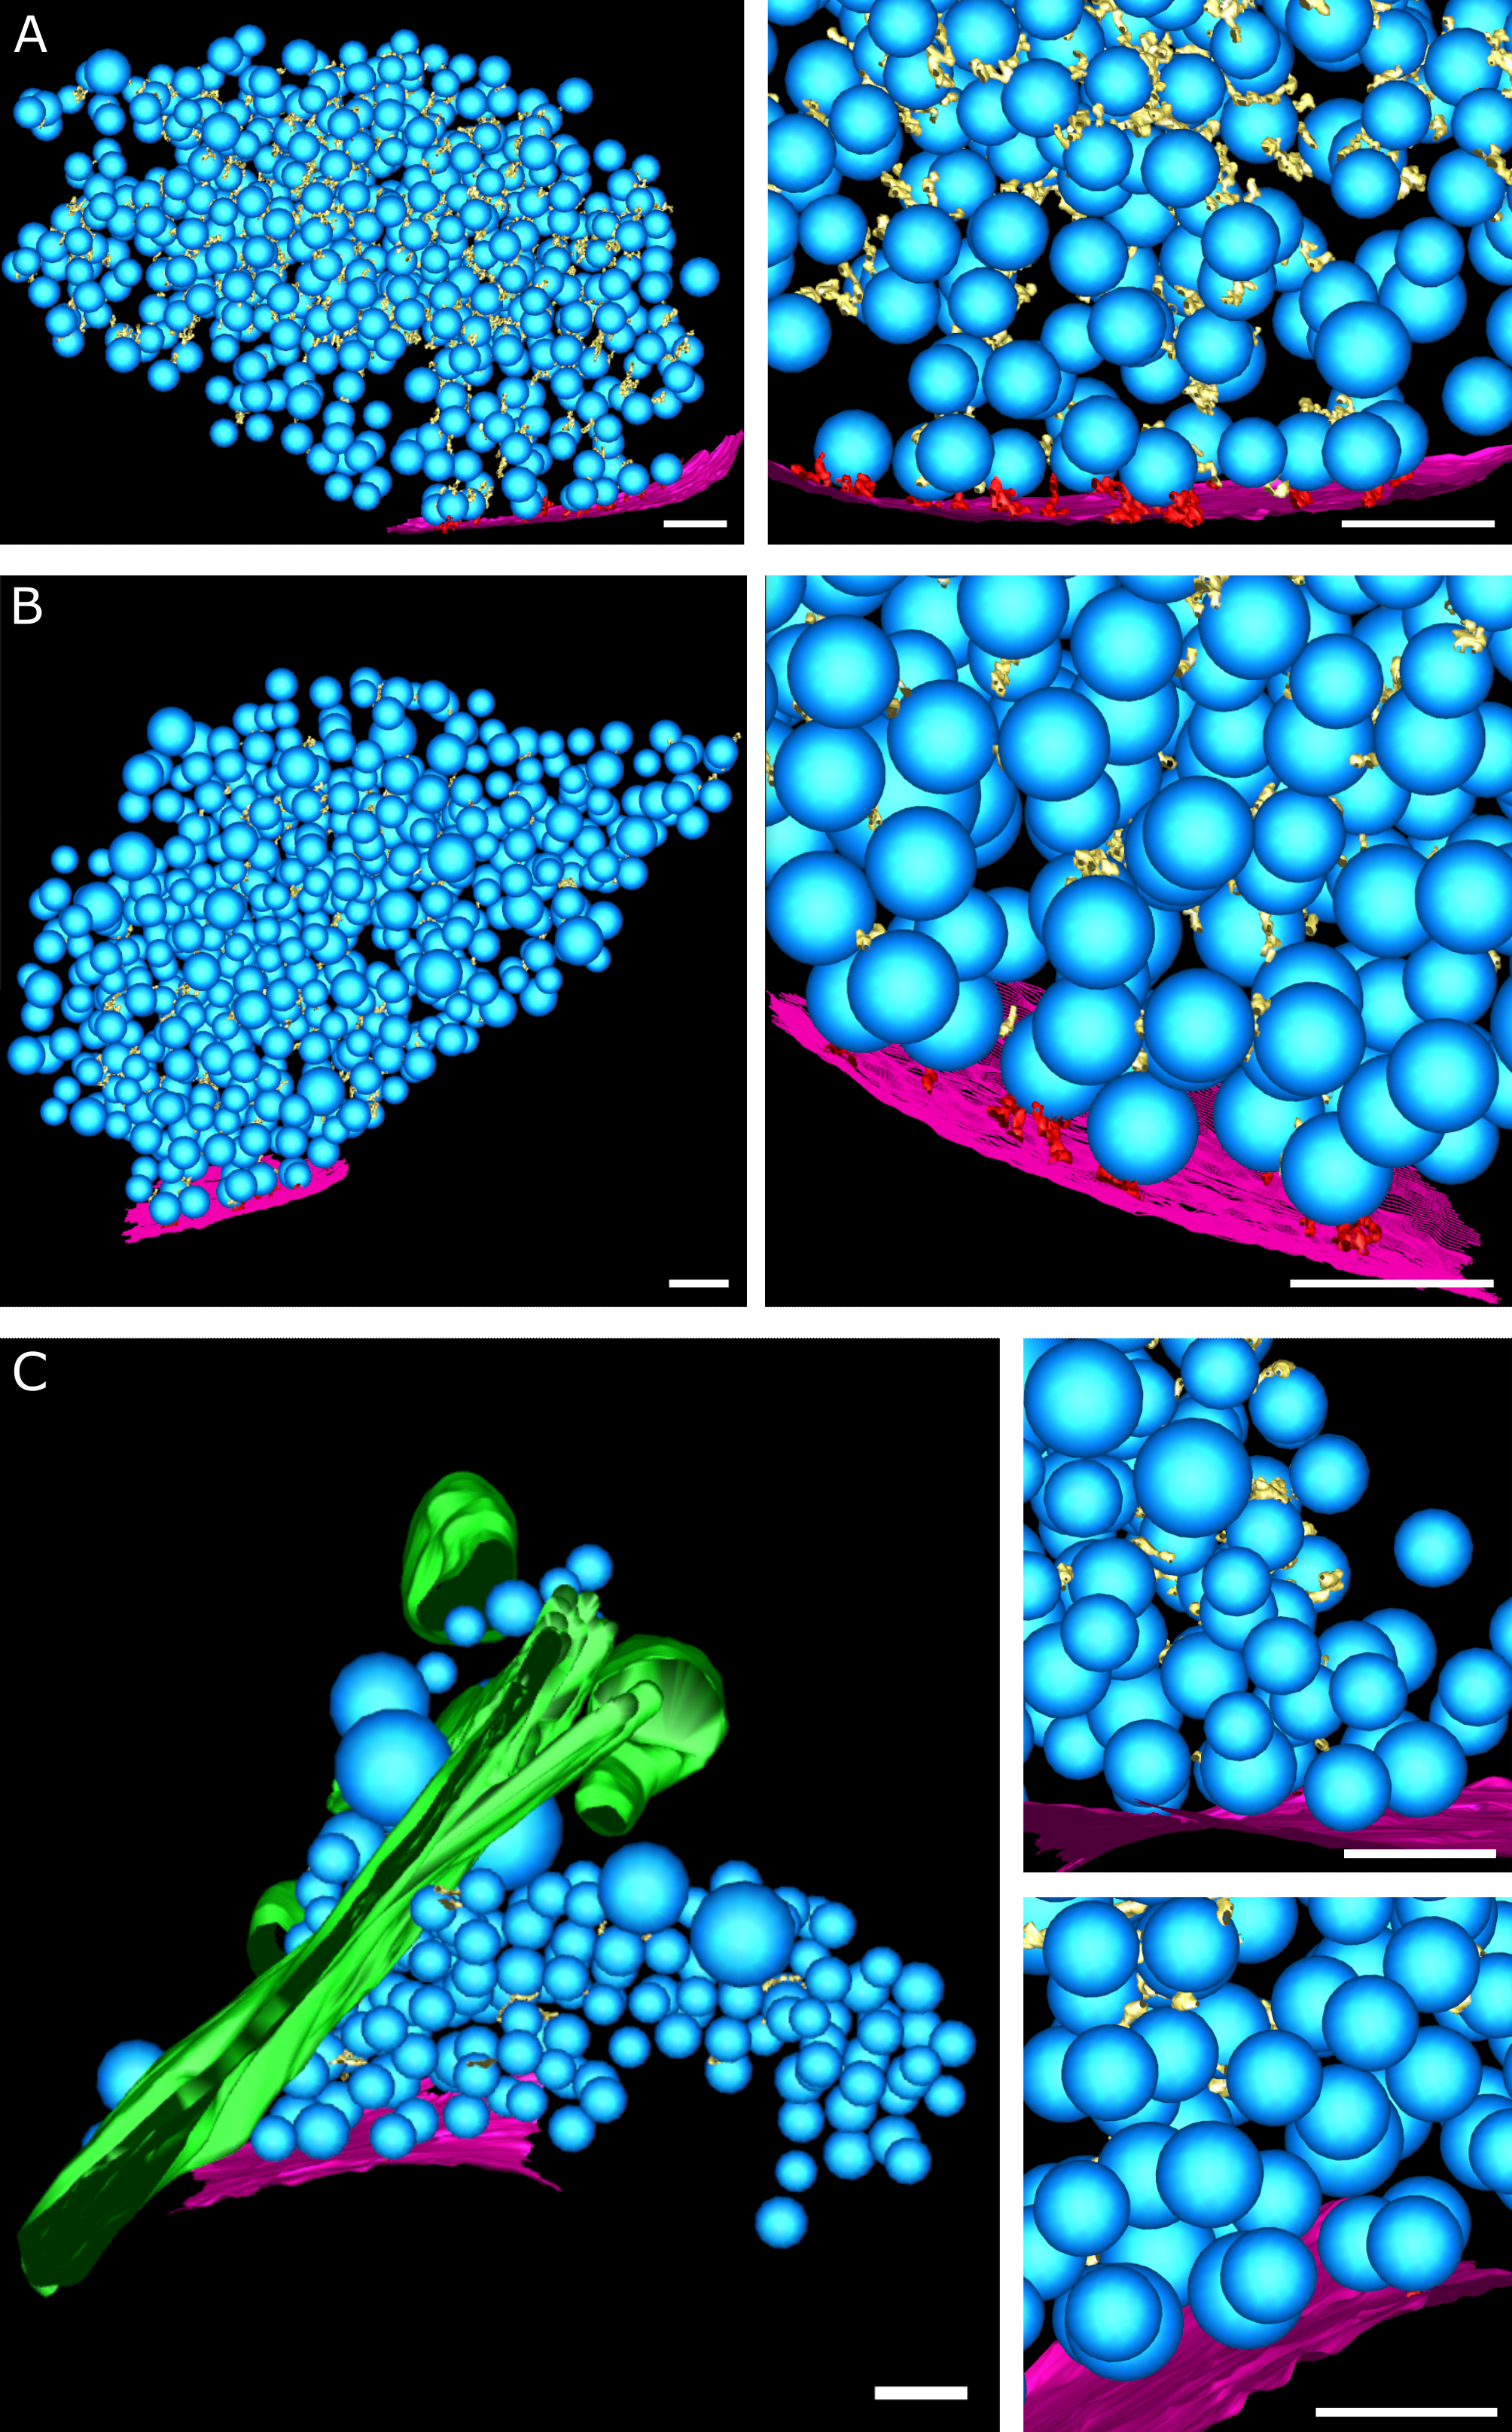 Figure S2: 3-D rendered segmented tomograms of neuron synapses. (A) SNAP-25 WT, (B) SNAP-25-4E, (C) SNAP-25-4K. (left) Overview, (right) detail. Blue: synaptic vesicles; purple: active zone plasma membrane; green: endoplasmic reticulum-like organelle; yellow: connectors; red: tethers. Scale bars: 100 nm, except in .